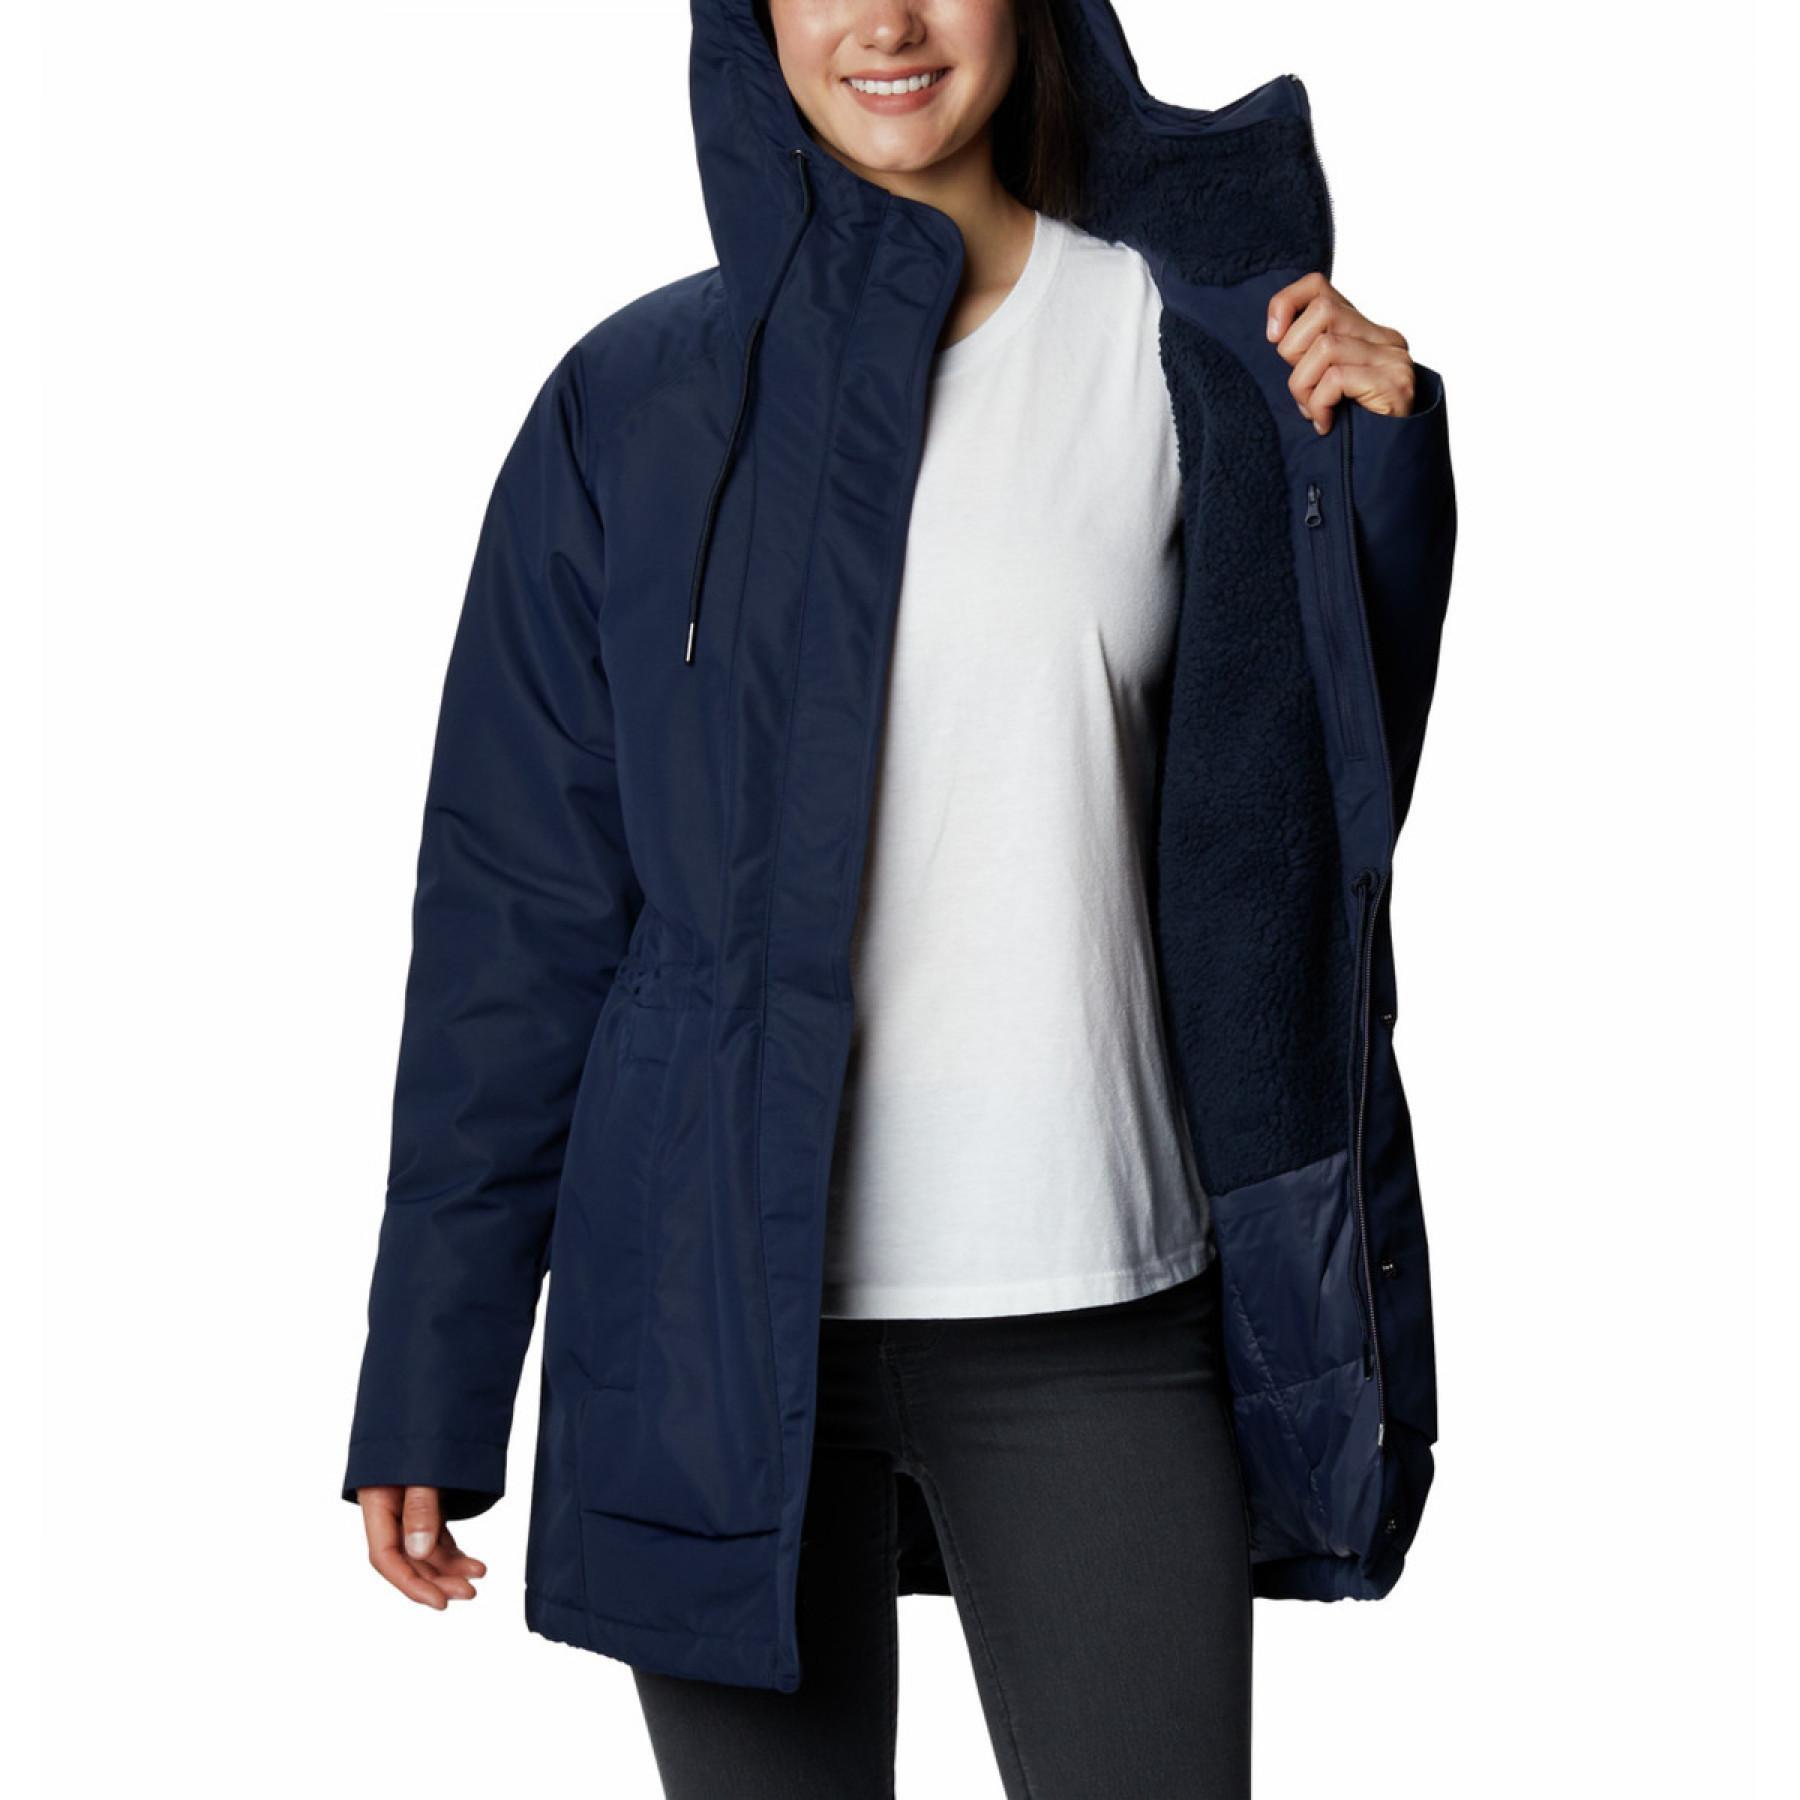 Veste femme Columbia South Canyon Sherpa Lined